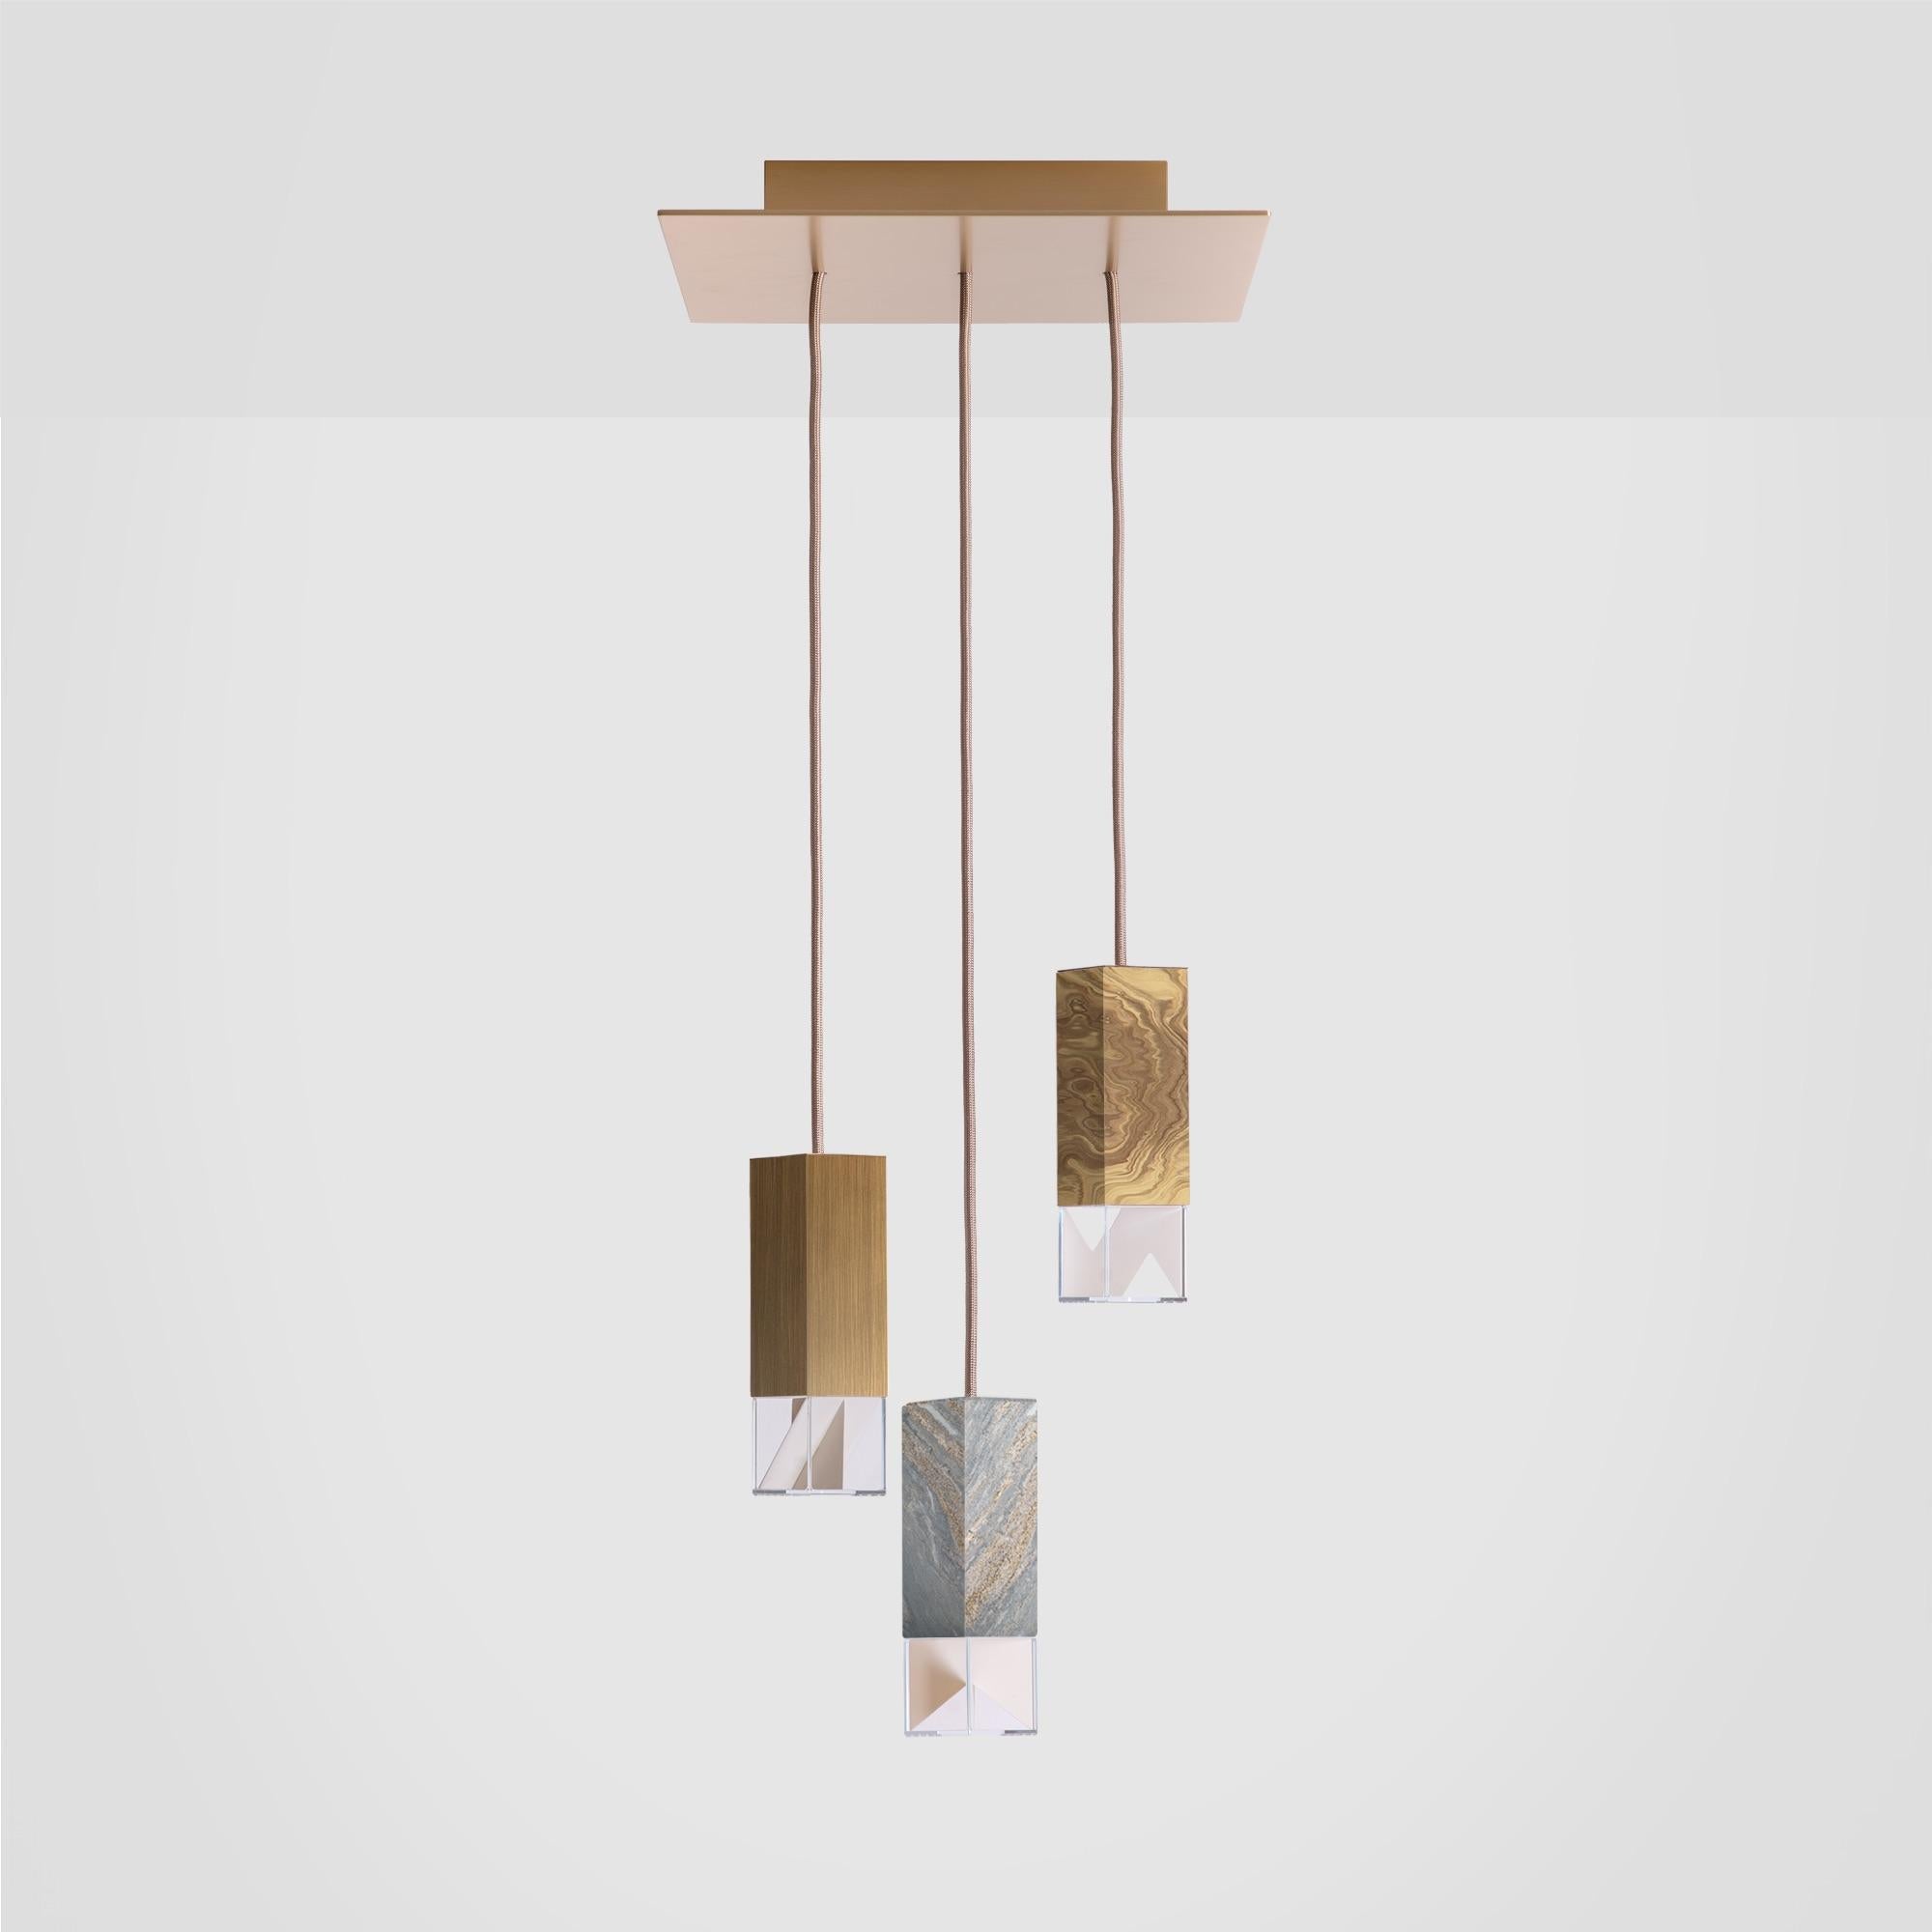 About
Modern 3 Light Chandelier Palissandro Marble, Brass and Olive by Formaminima

Lamp/One Revamp Edition Chandelier 01
Design by Formaminima
Chandelier
Materials:
Body lamp handcrafted in burnished satin brass, solid Palissandro Blu Nuvolato